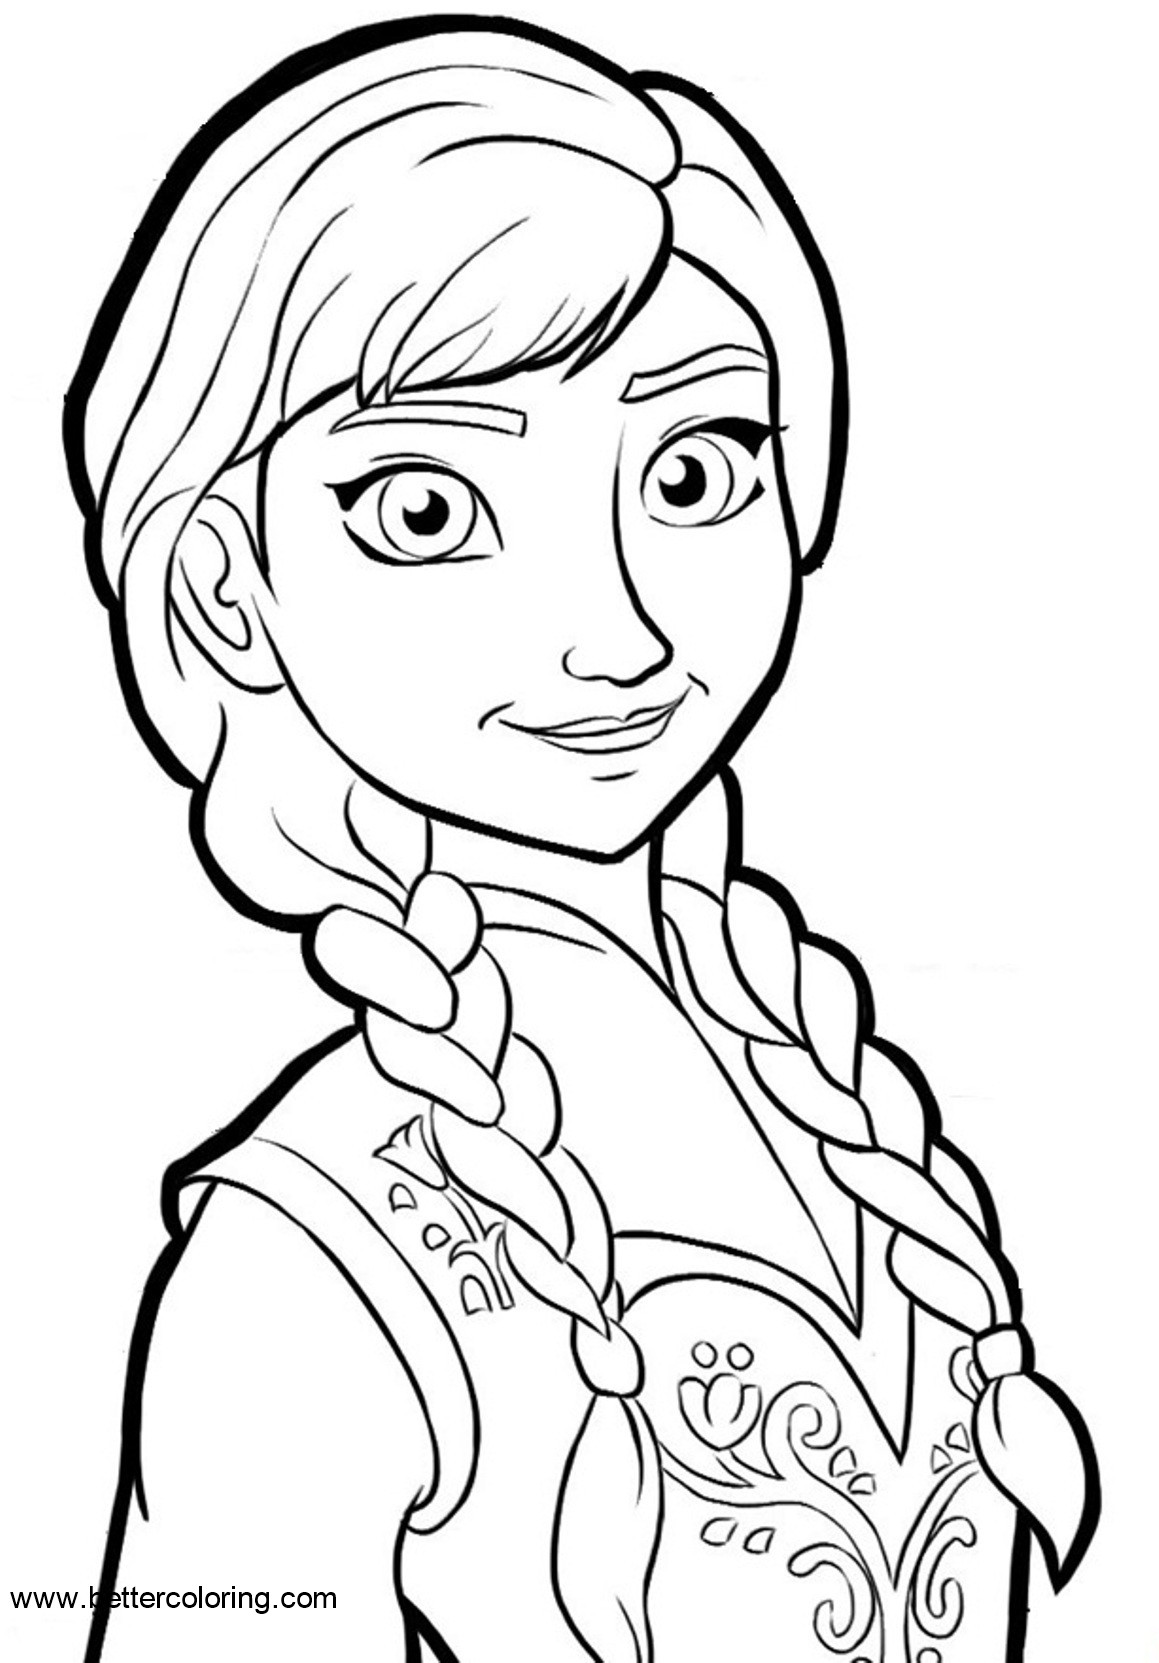 Coloring Pages : Coloring Princess Elsa And Annantable Frozen ...